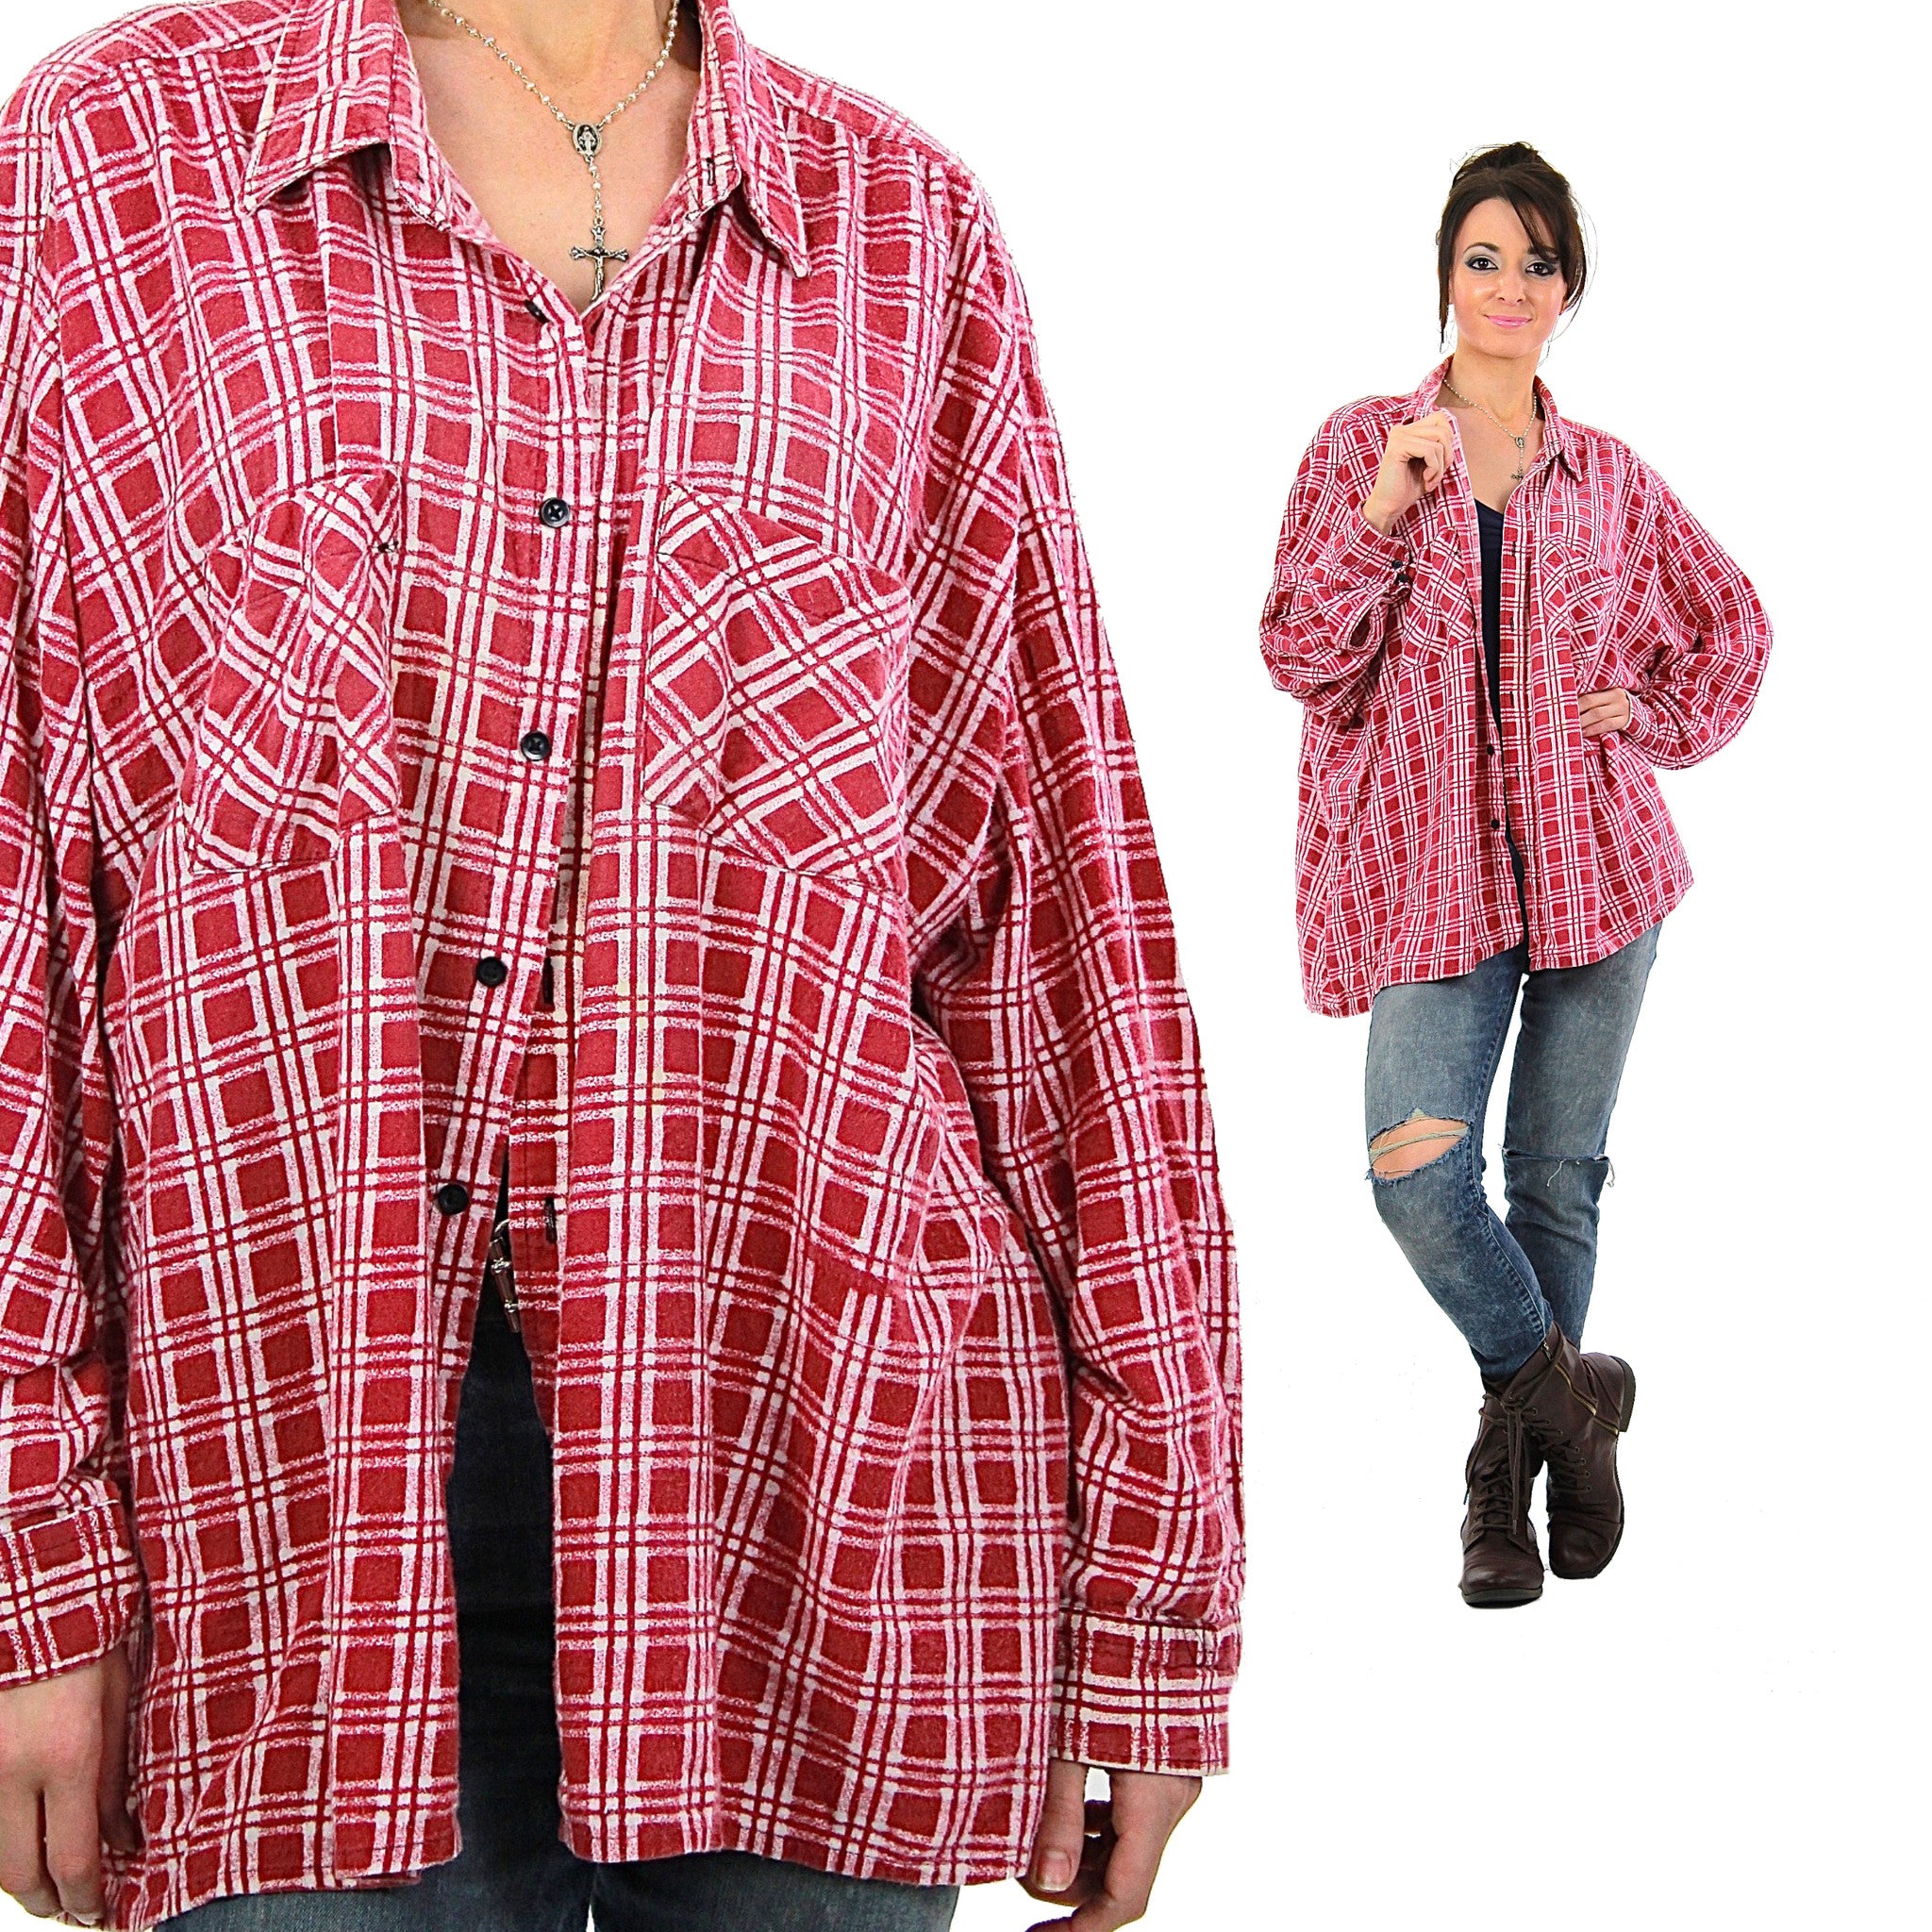 Oversized Flannel Shirts For Women Toffee Art - 2p yellow black plaid flannel shirt roblox